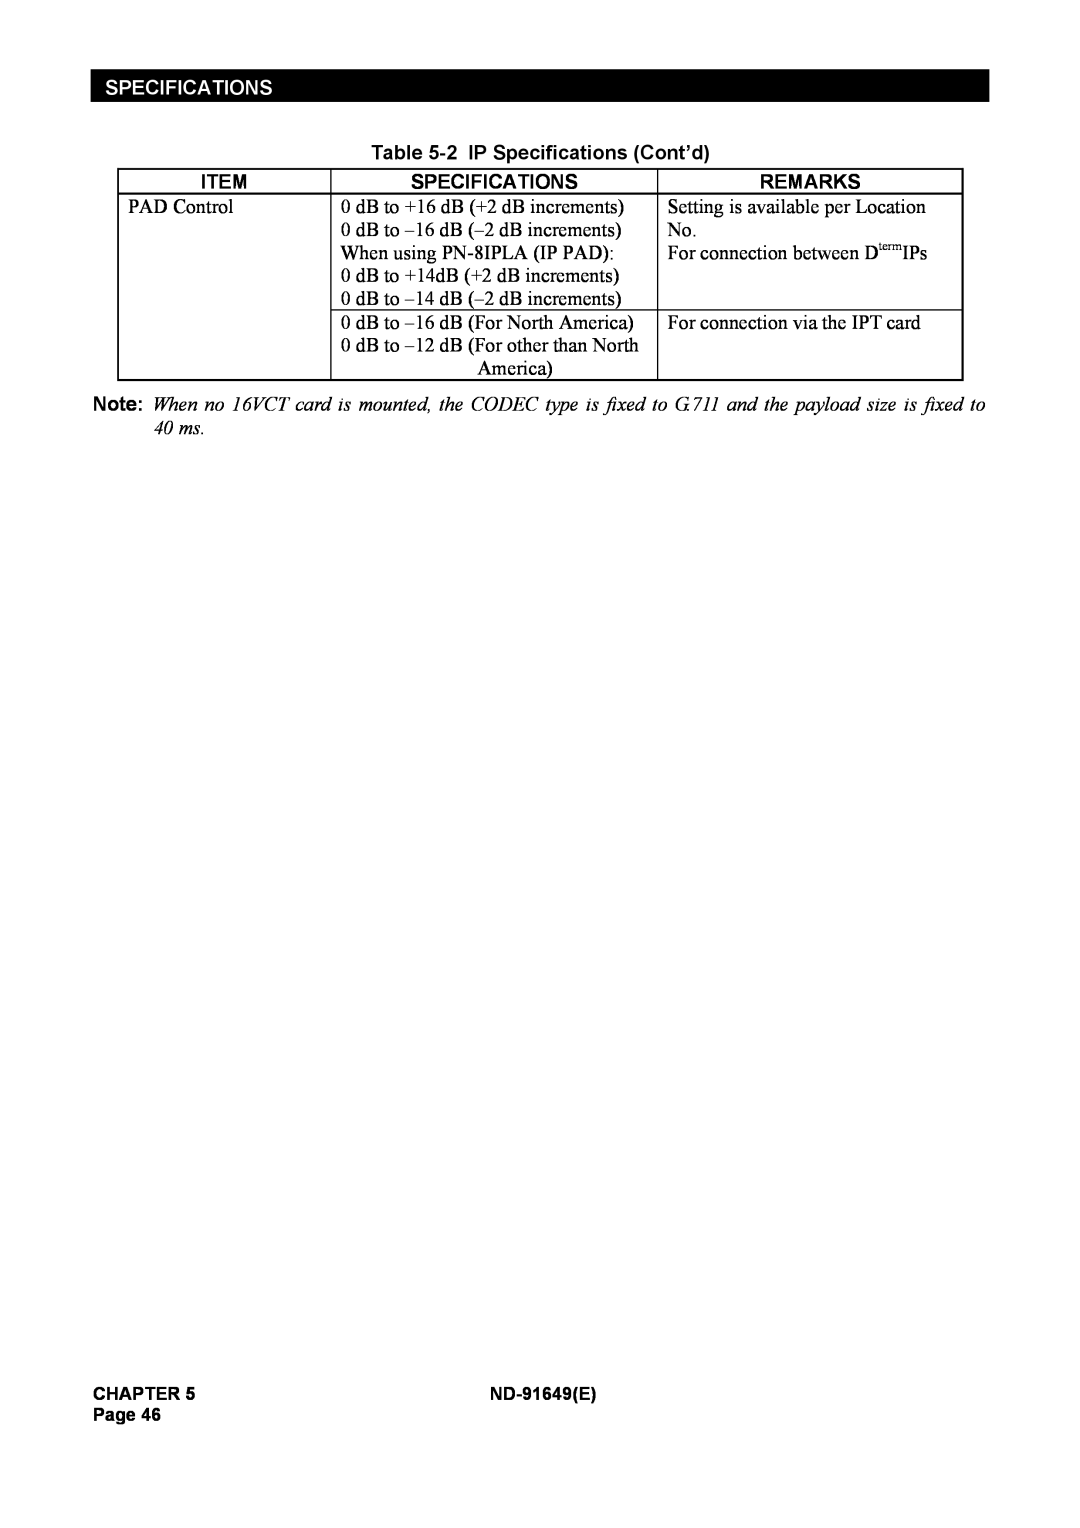 NEC ND-91649 manual 2 IP Specifications Cont’d, Remarks 